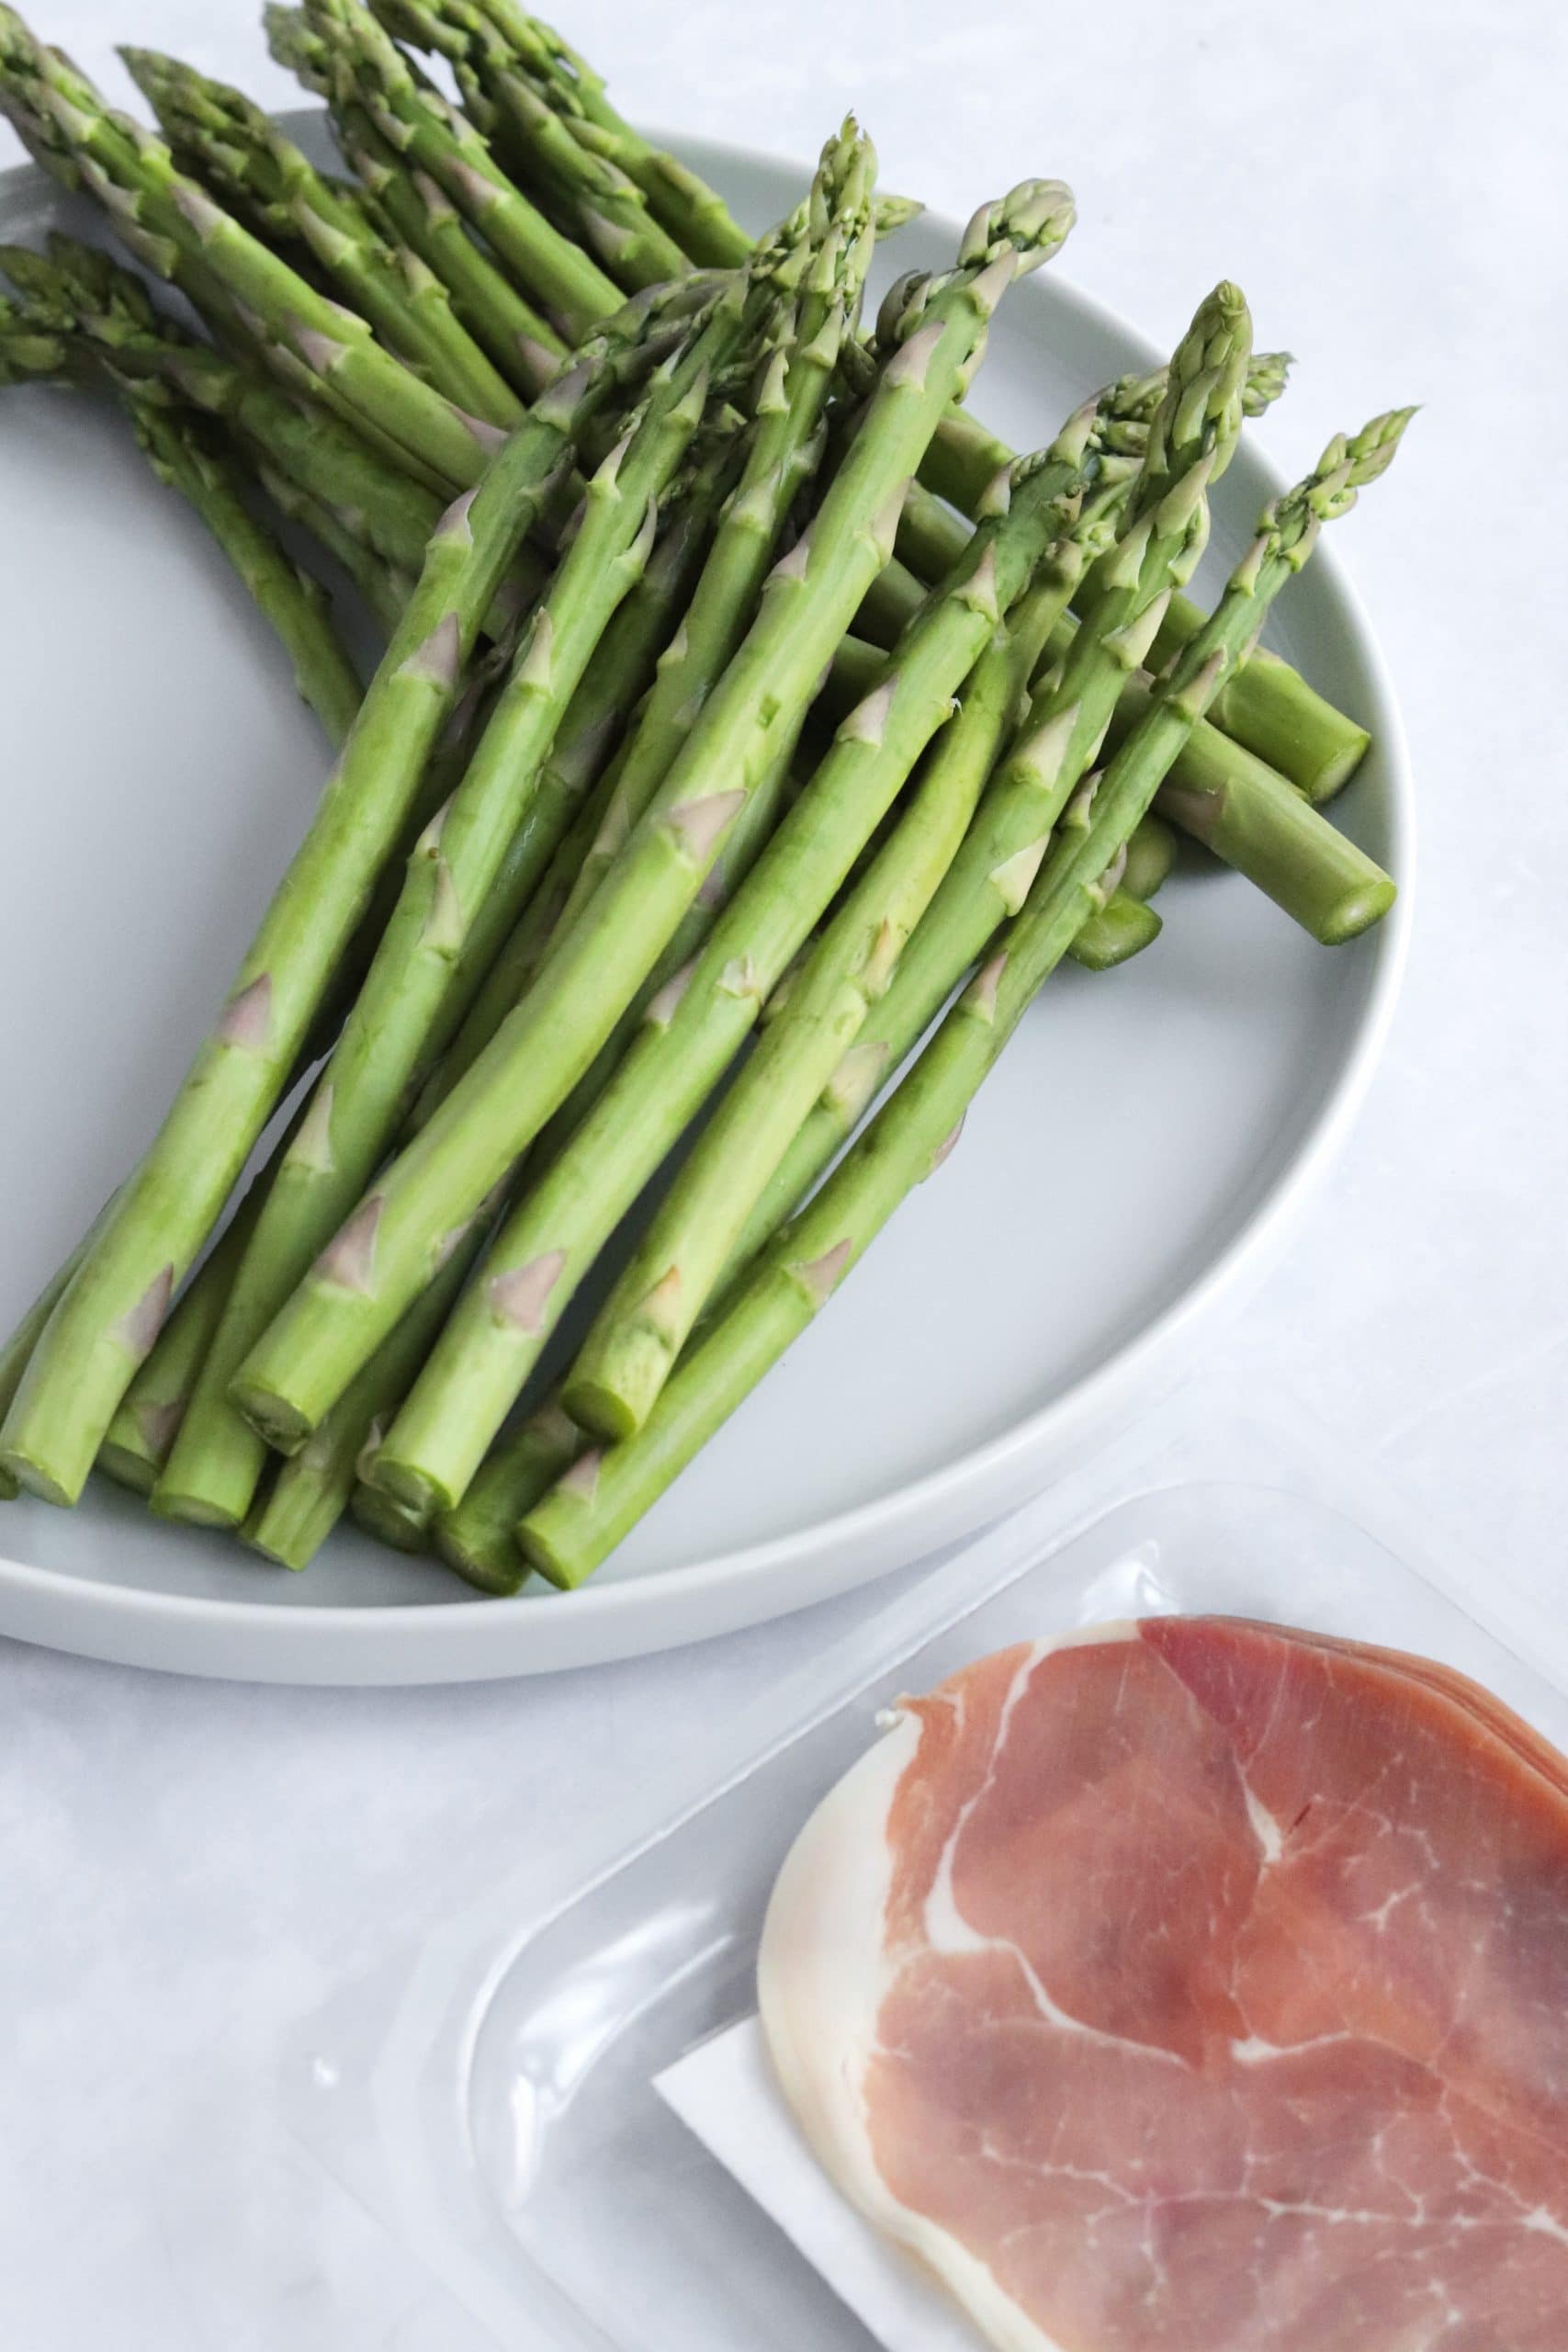 Raw asparagus and prosciutto slices